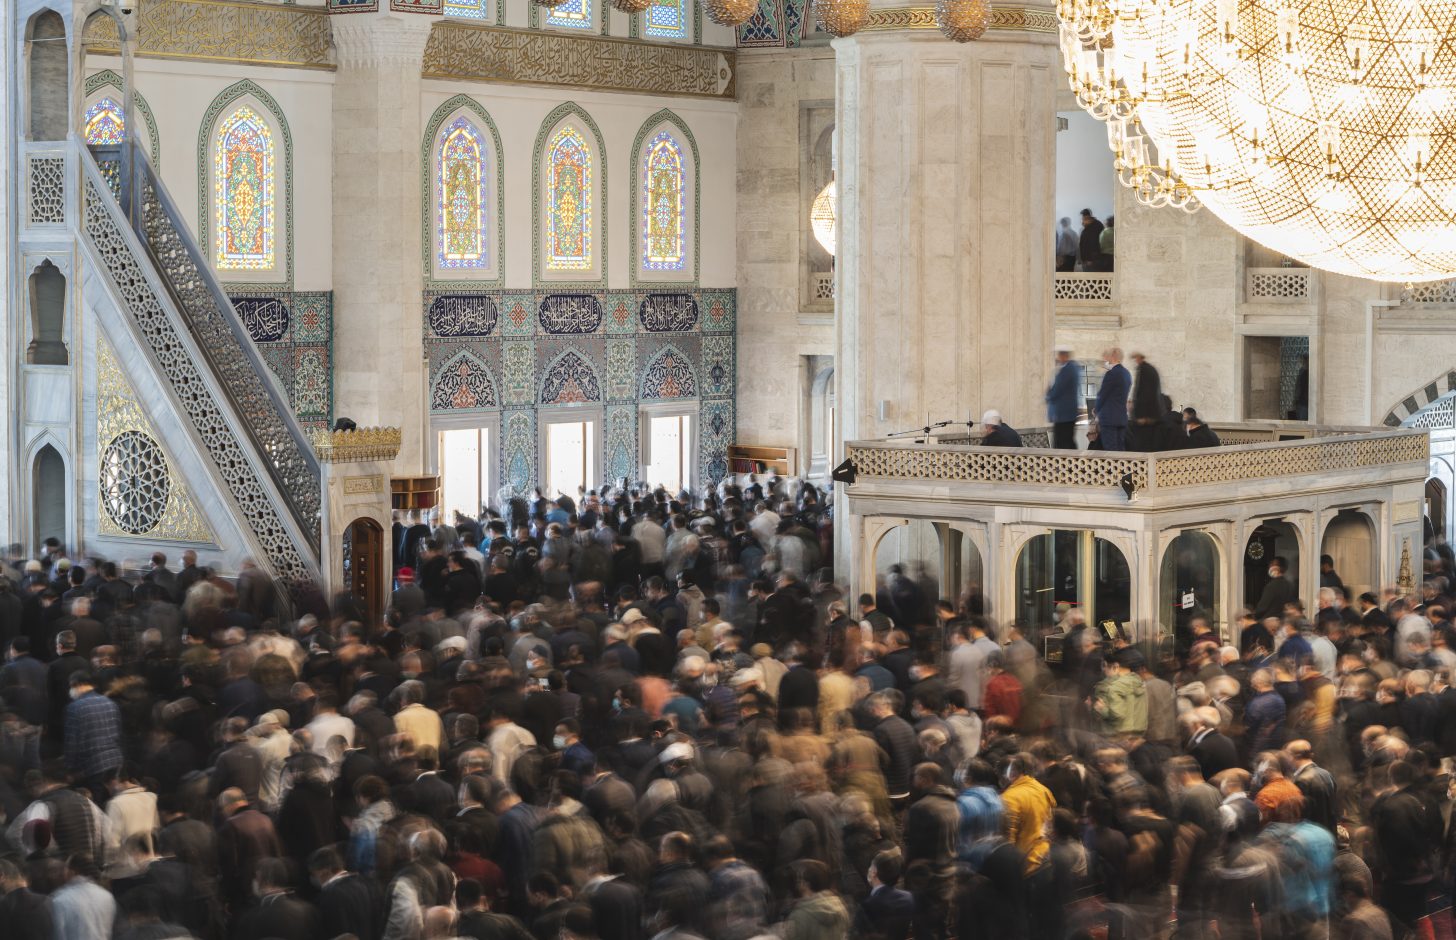 Large crowd gathered in a mosque